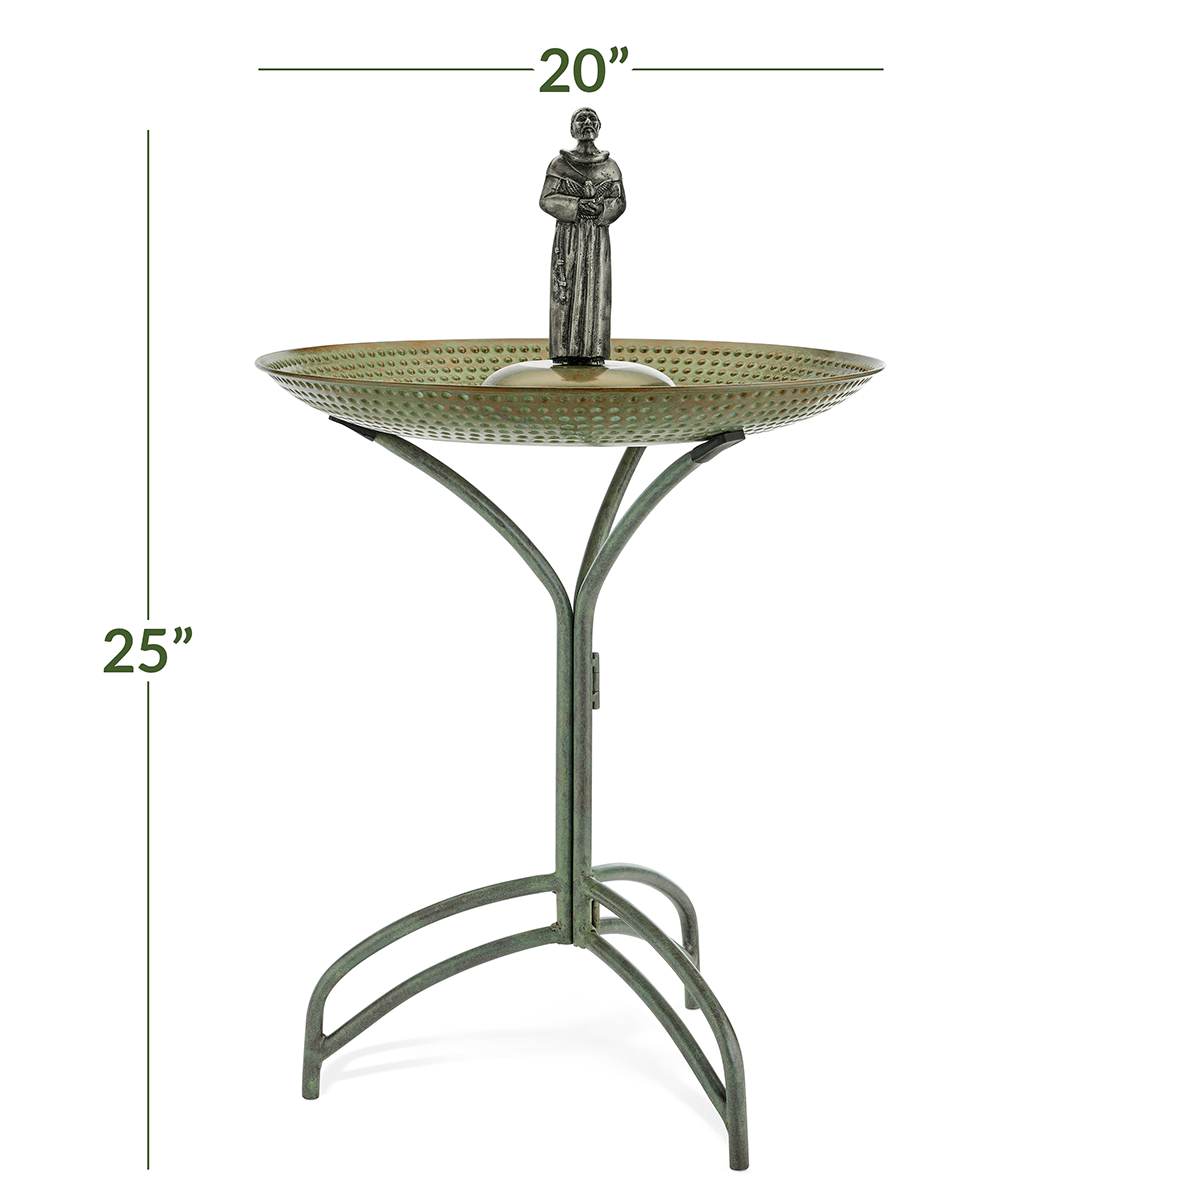 20" Blue Verde Copper Bird Bath with St Francis - Good Directions